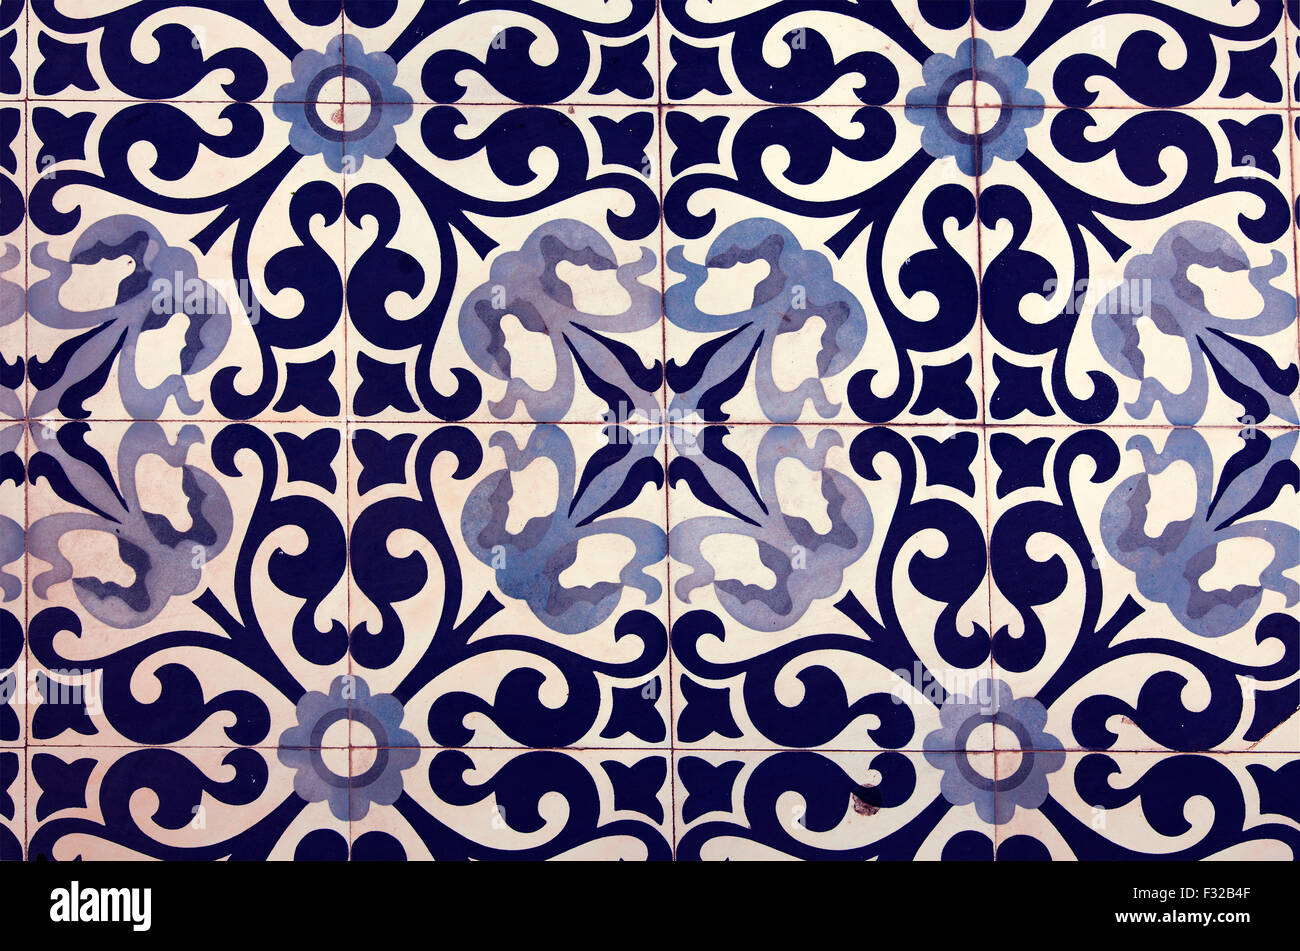 Image of traditional Moroccan cement or ceramic tiles with geometric patterns. Stock Photo